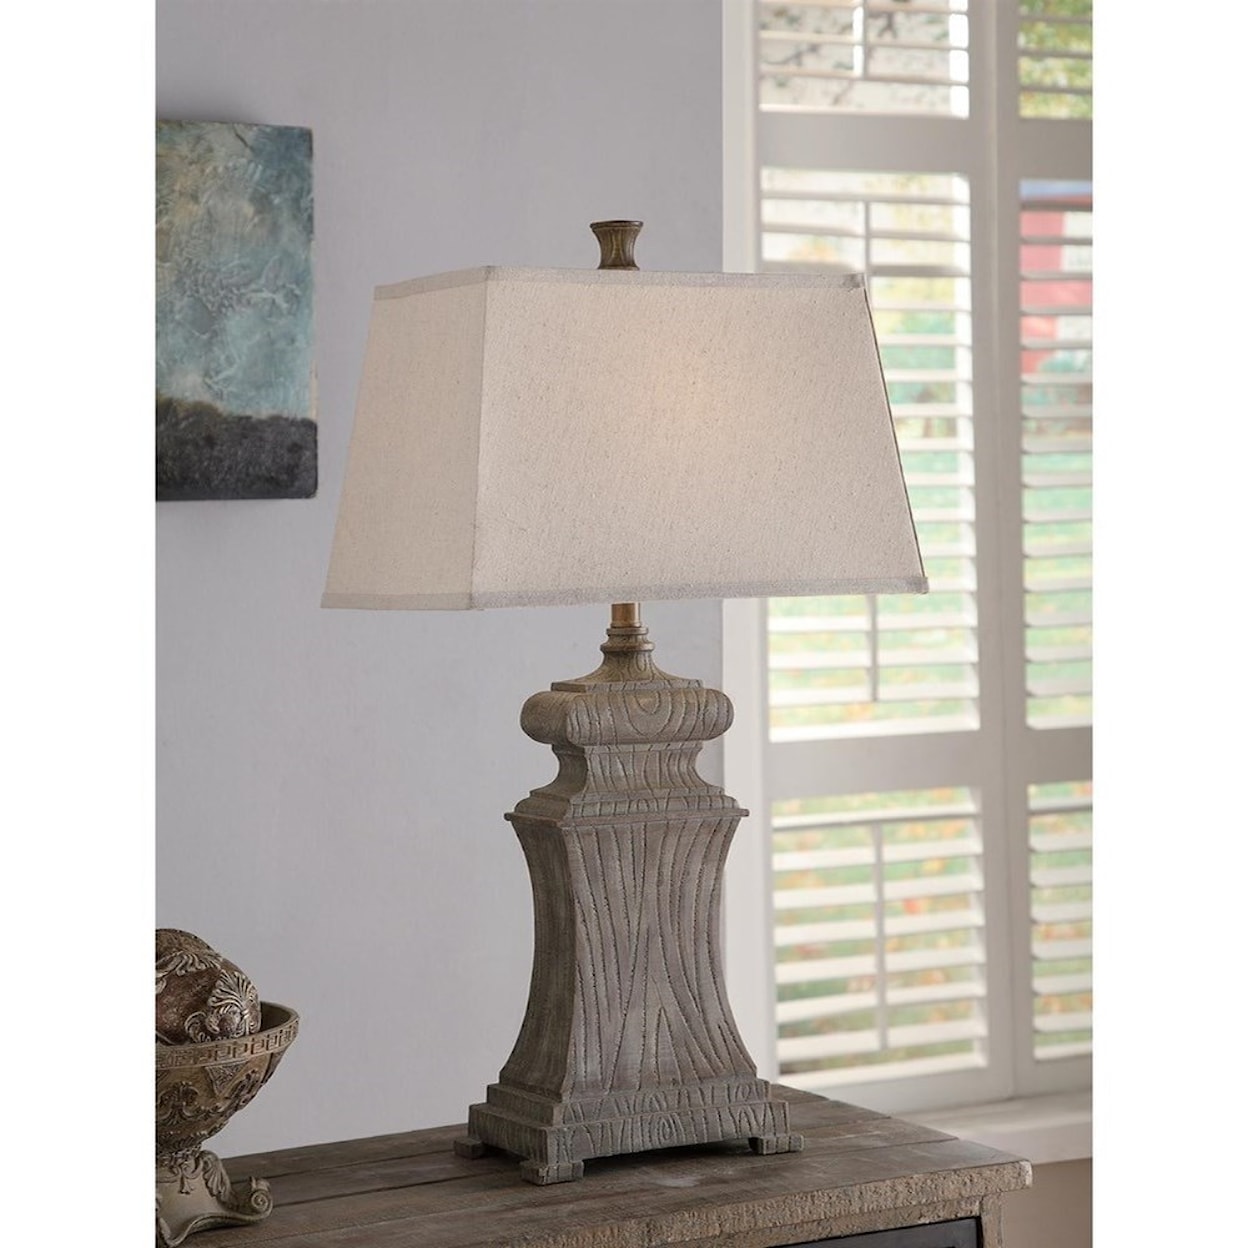 Crestview Collection Lighting Lombardi Table Lamp